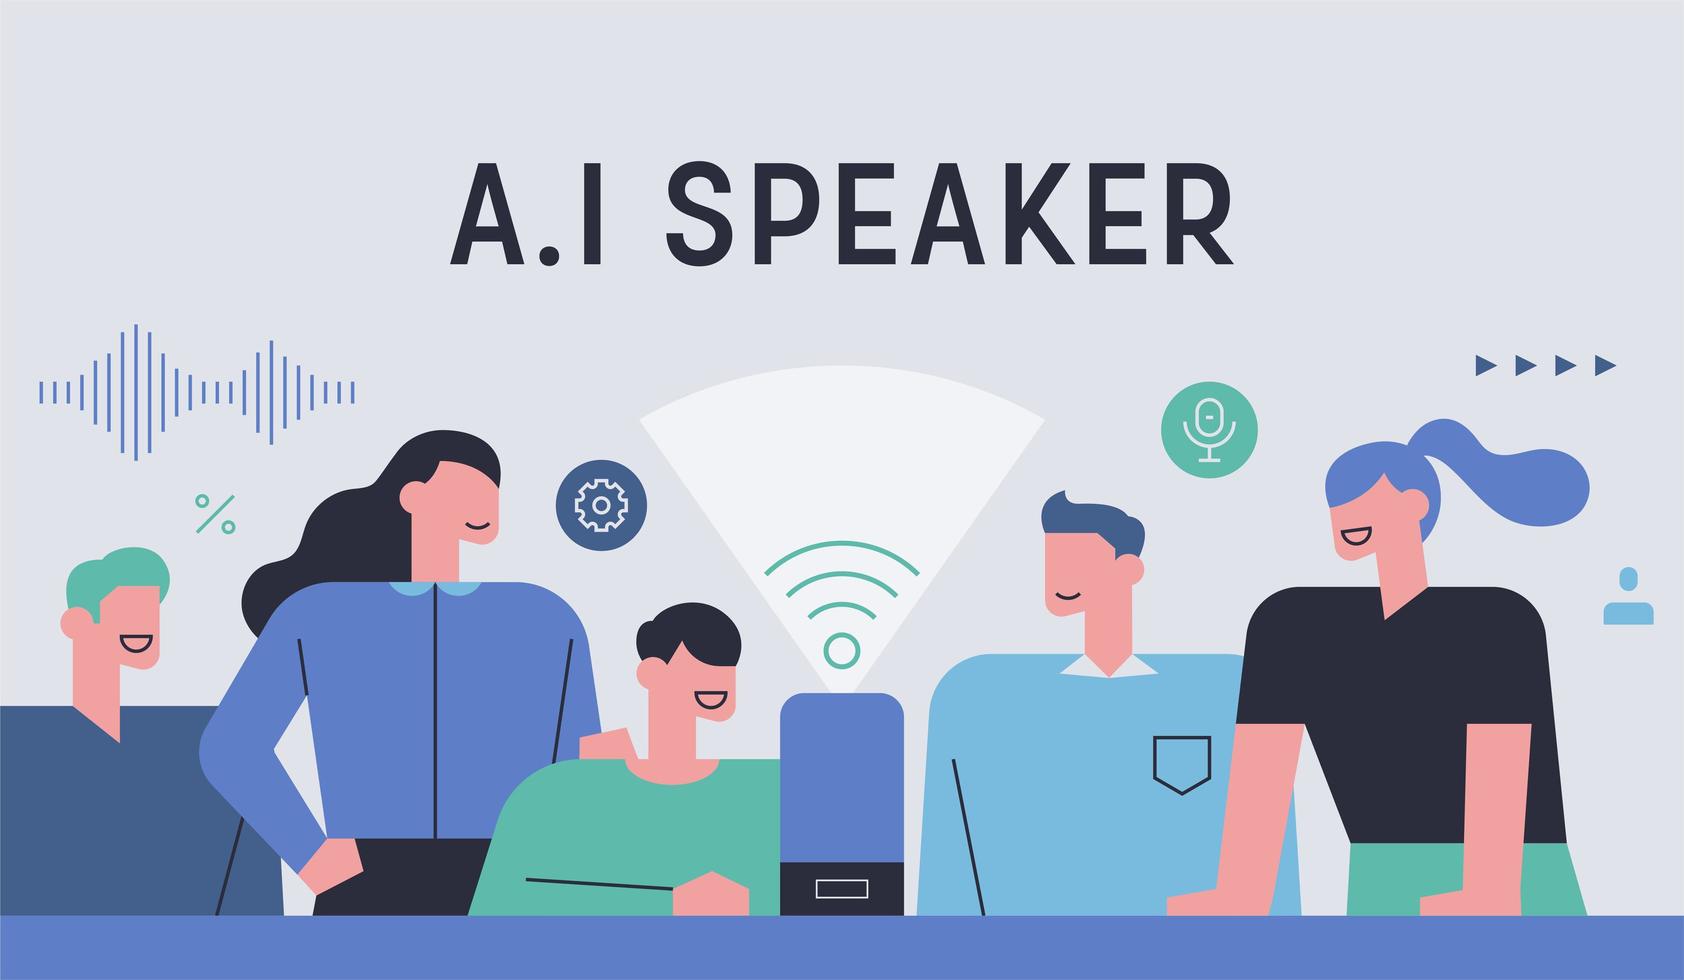 A.I speaker and lifestyle vector